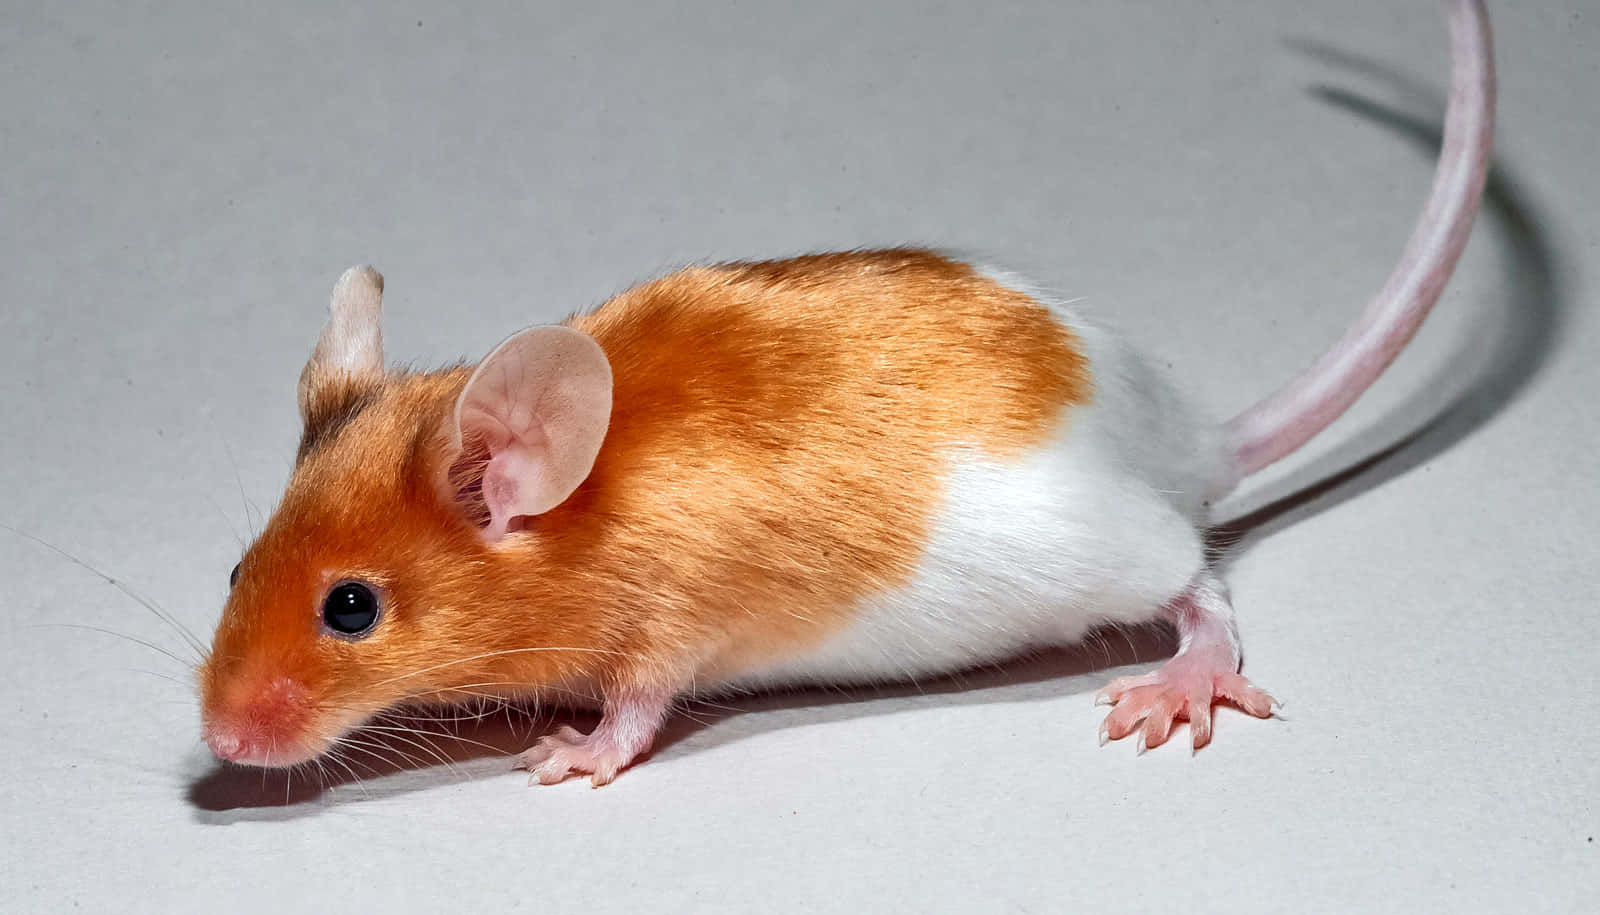 A Brown And White Mouse Is Standing On A White Surface